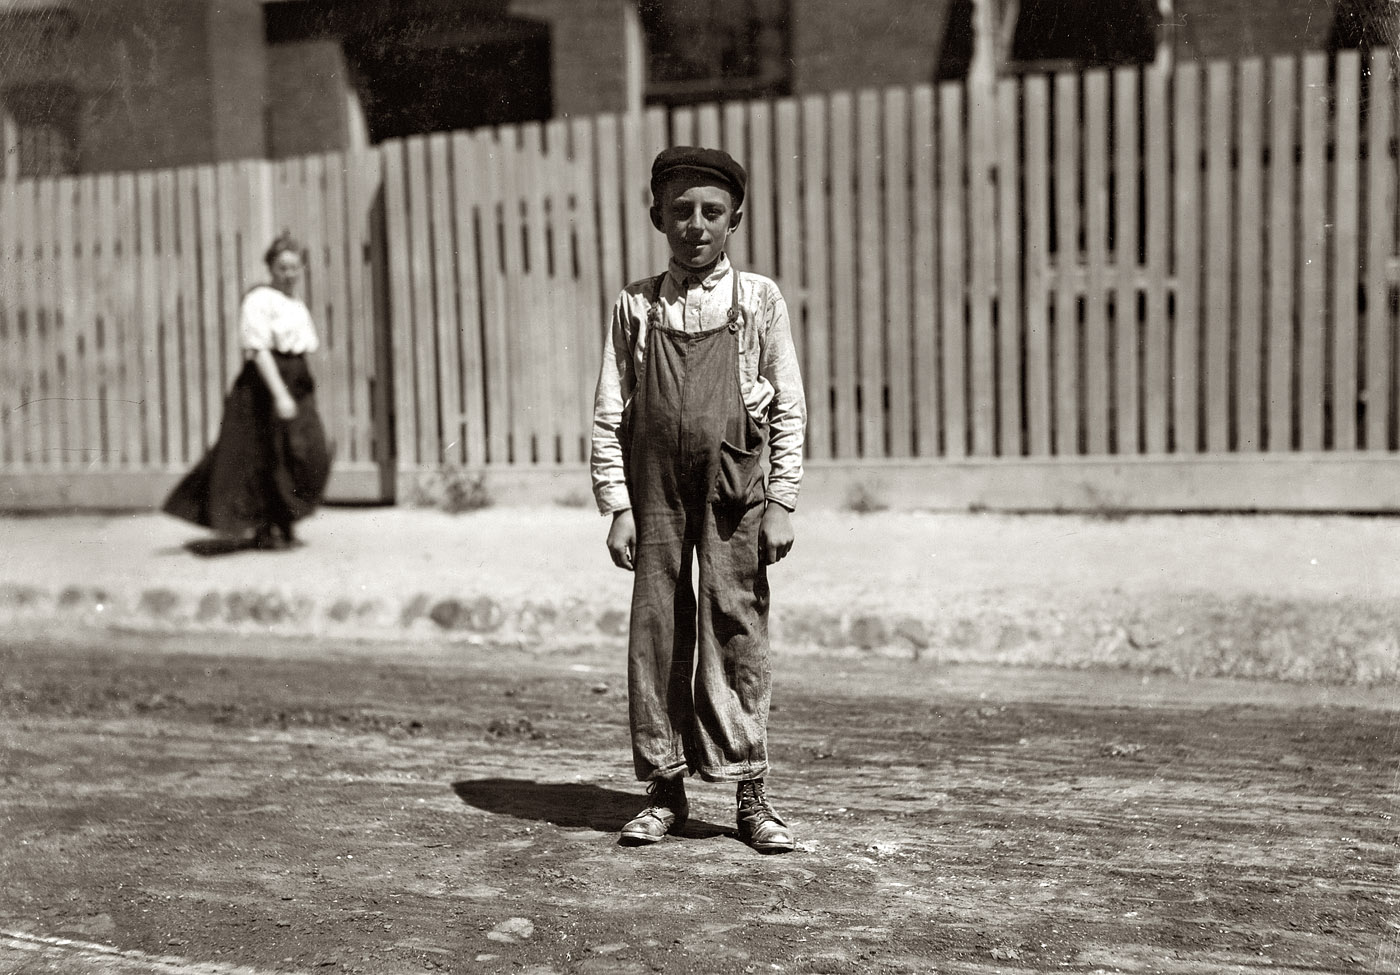 August 1911. New Bedford, Massachusetts. "John Bachman, 22 Nelson Street, Ward 6. Works in drawing-in room at Acushnet Mill. 14 years old." Photograph by Lewis Wickes Hine. View full size.